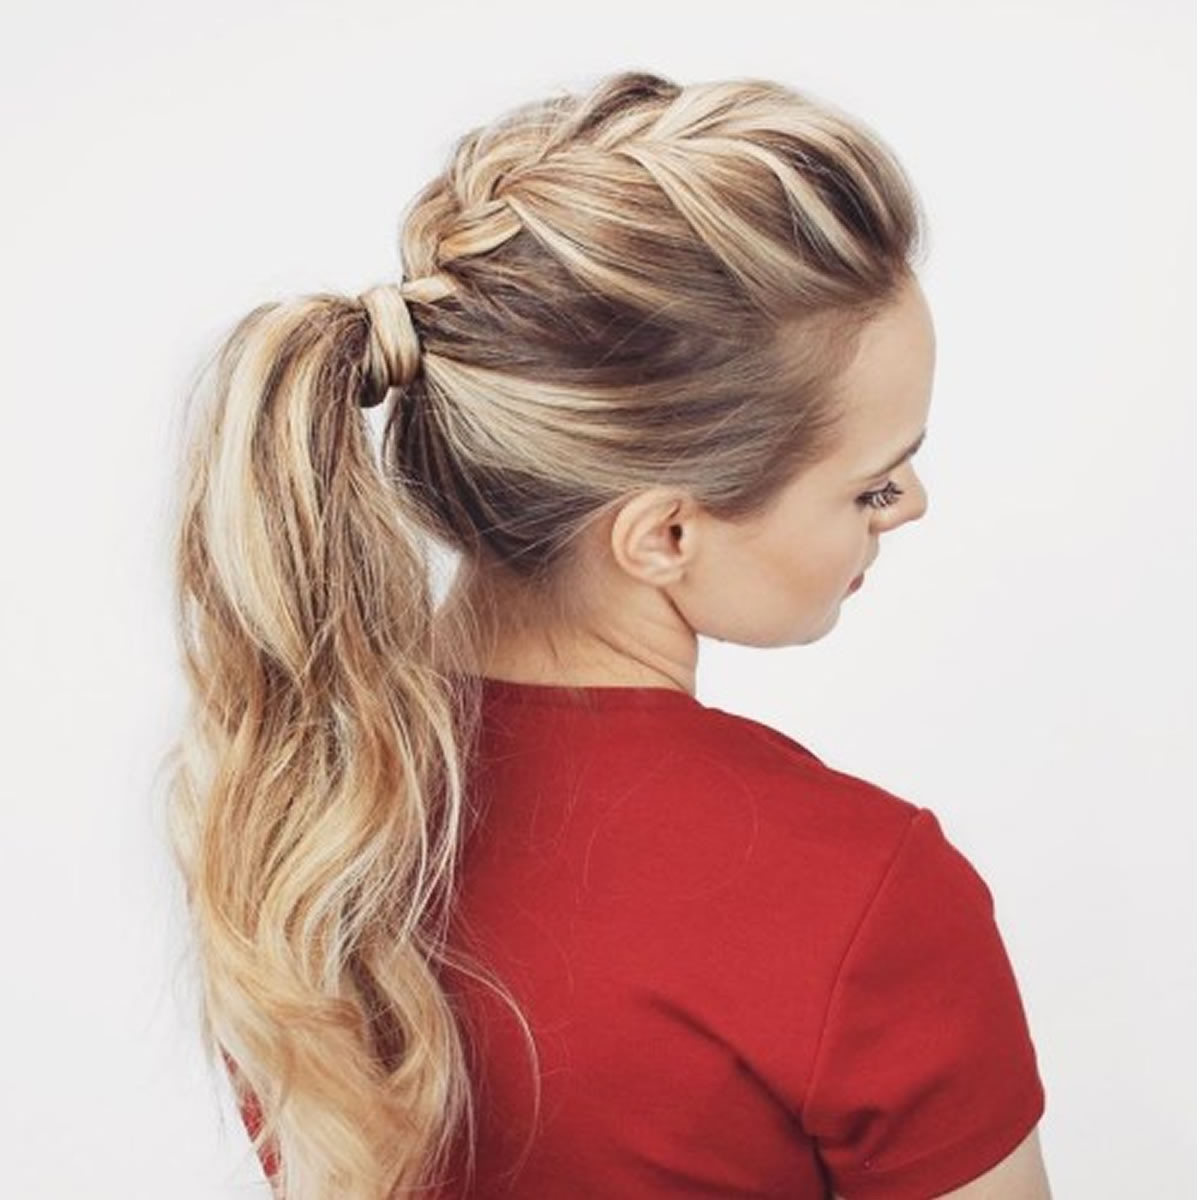 Video Of Hairstyle
 The 20 Most Attractive Ponytail Hairstyles for Women